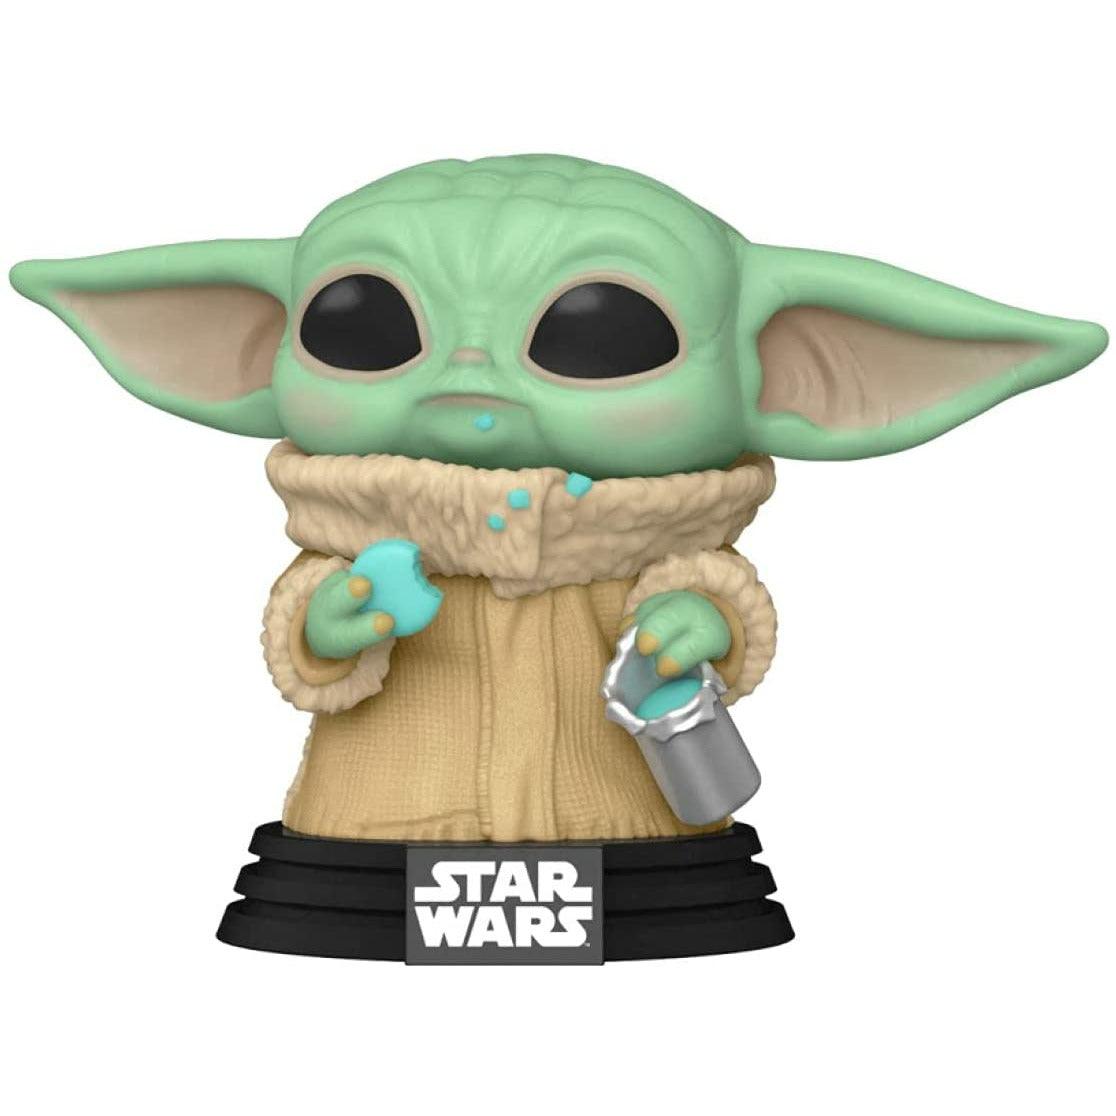 Funko pop Star Wars: The Mandalorian - The Child, Grogu with Cookie 465 - BumbleToys - 18+, Action Figures, Boys, Funko, star wars